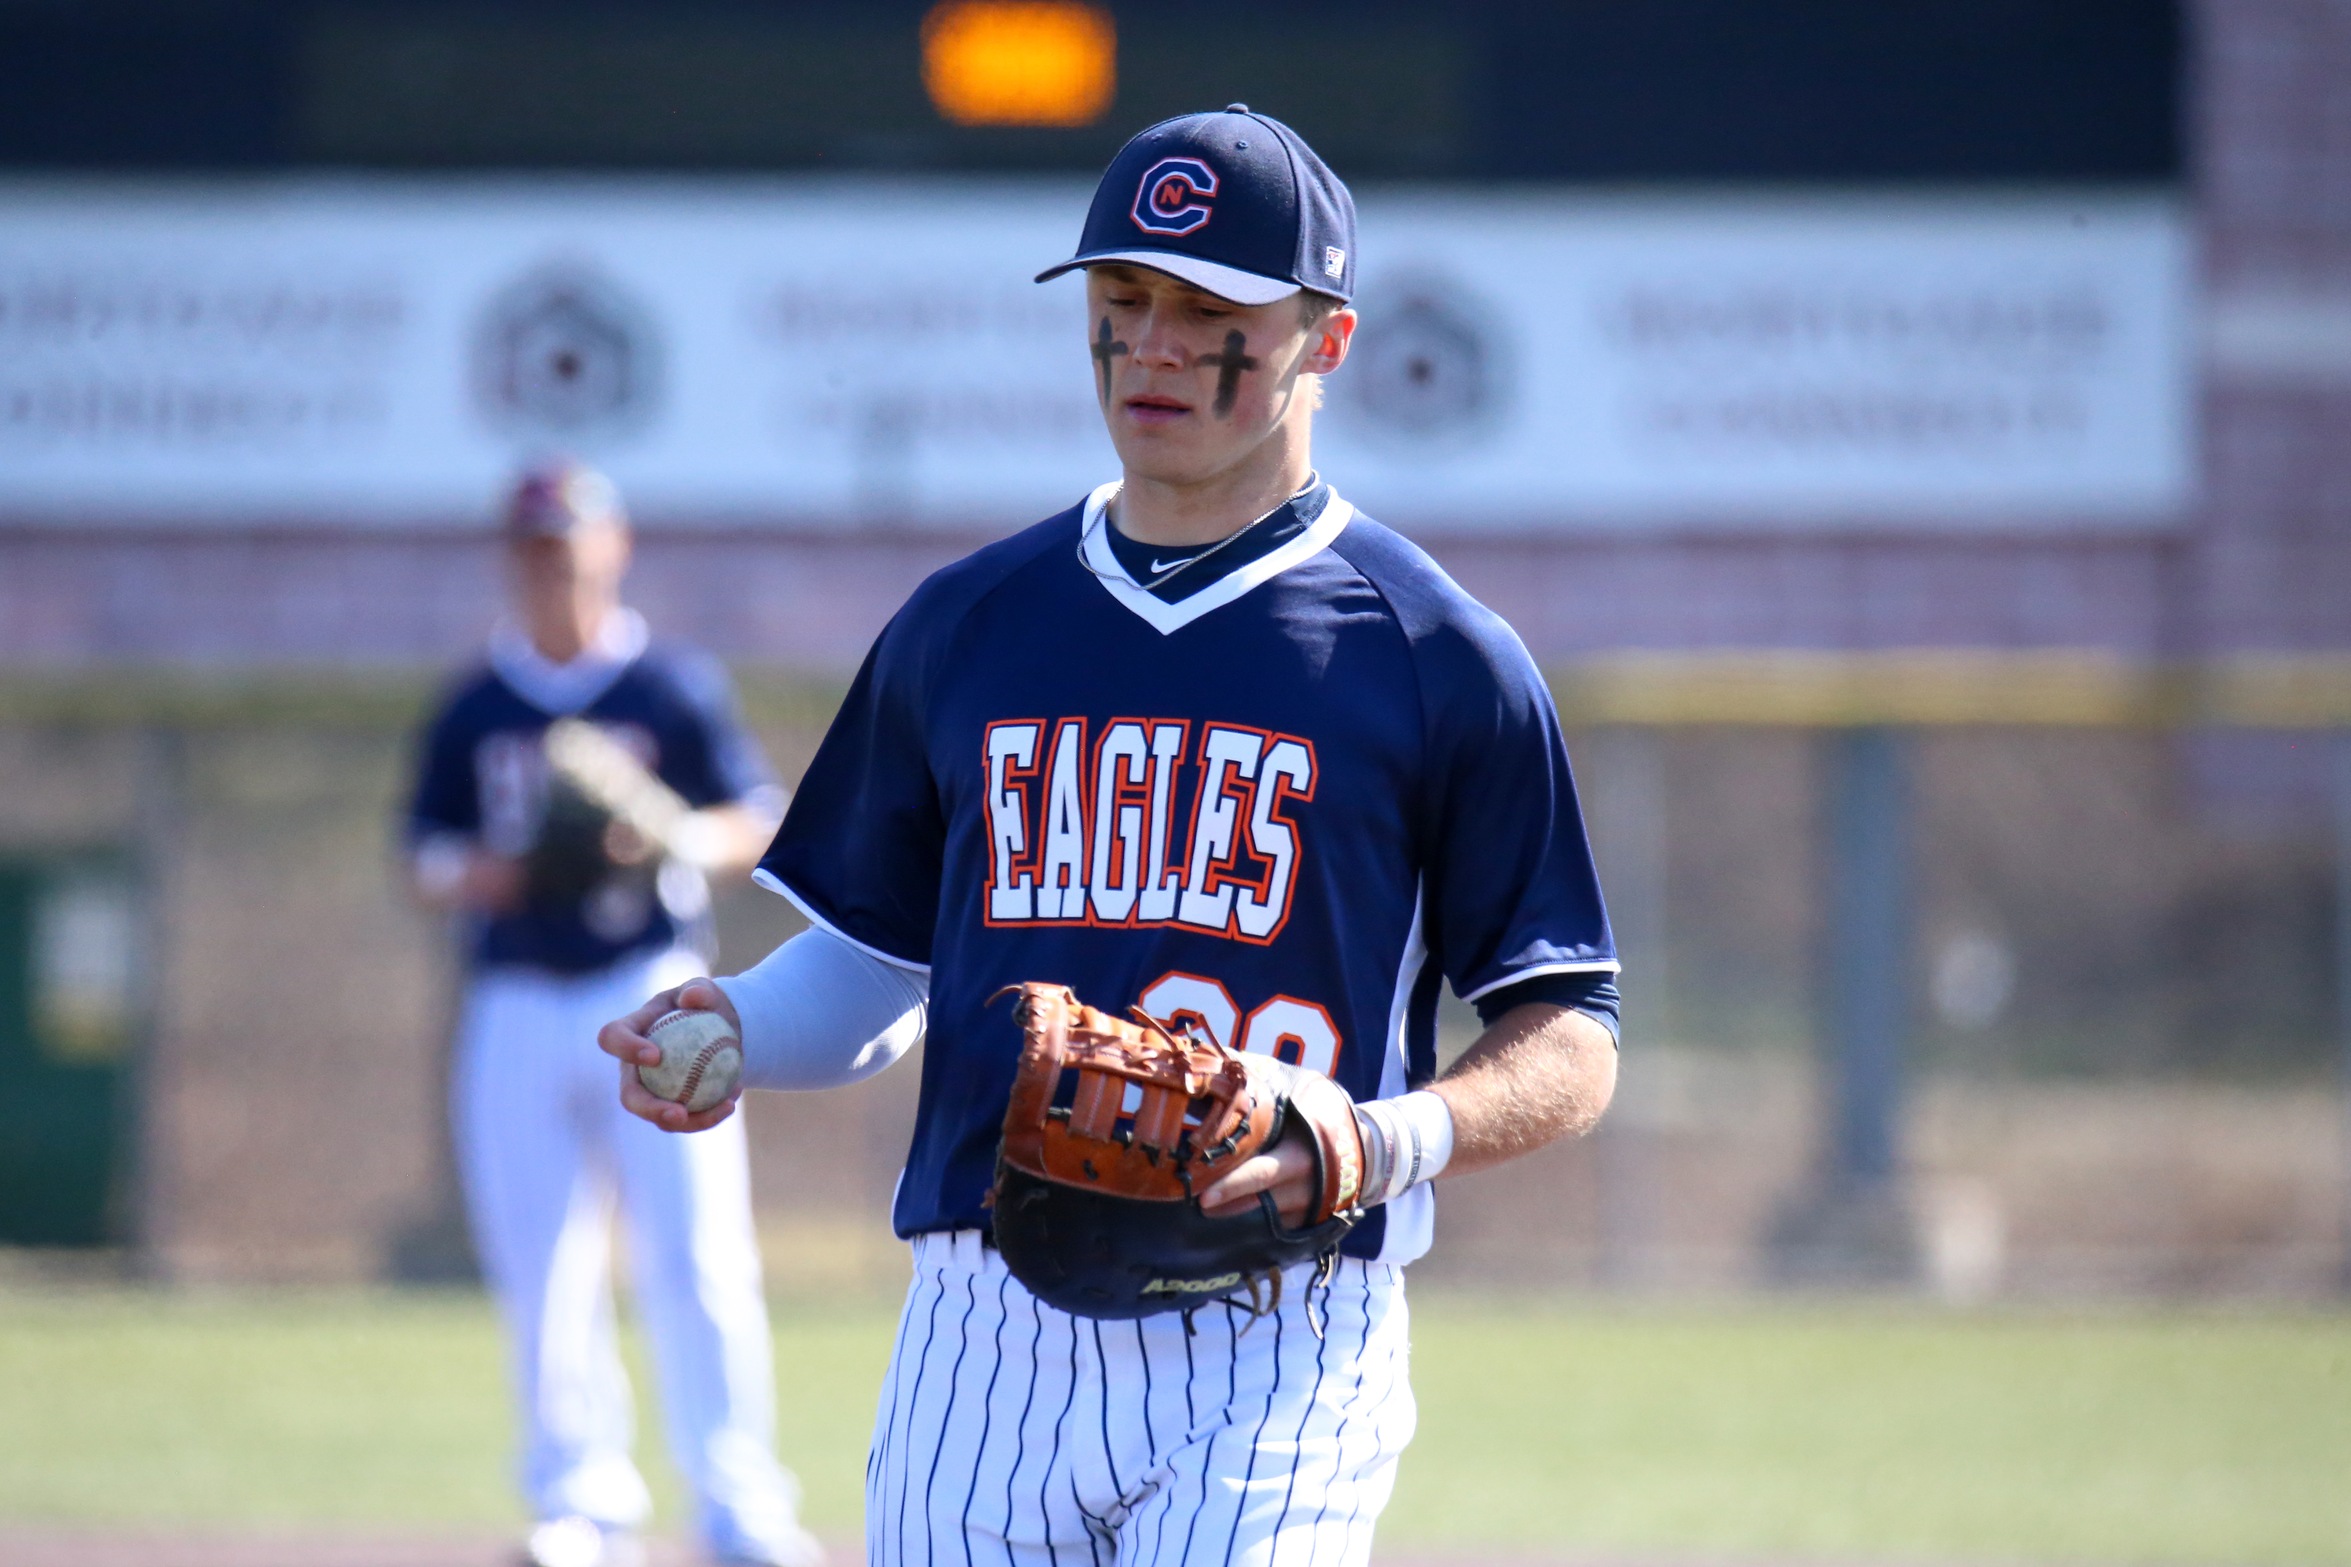 Rally lifts Eagles to split at No. 9 Newberry